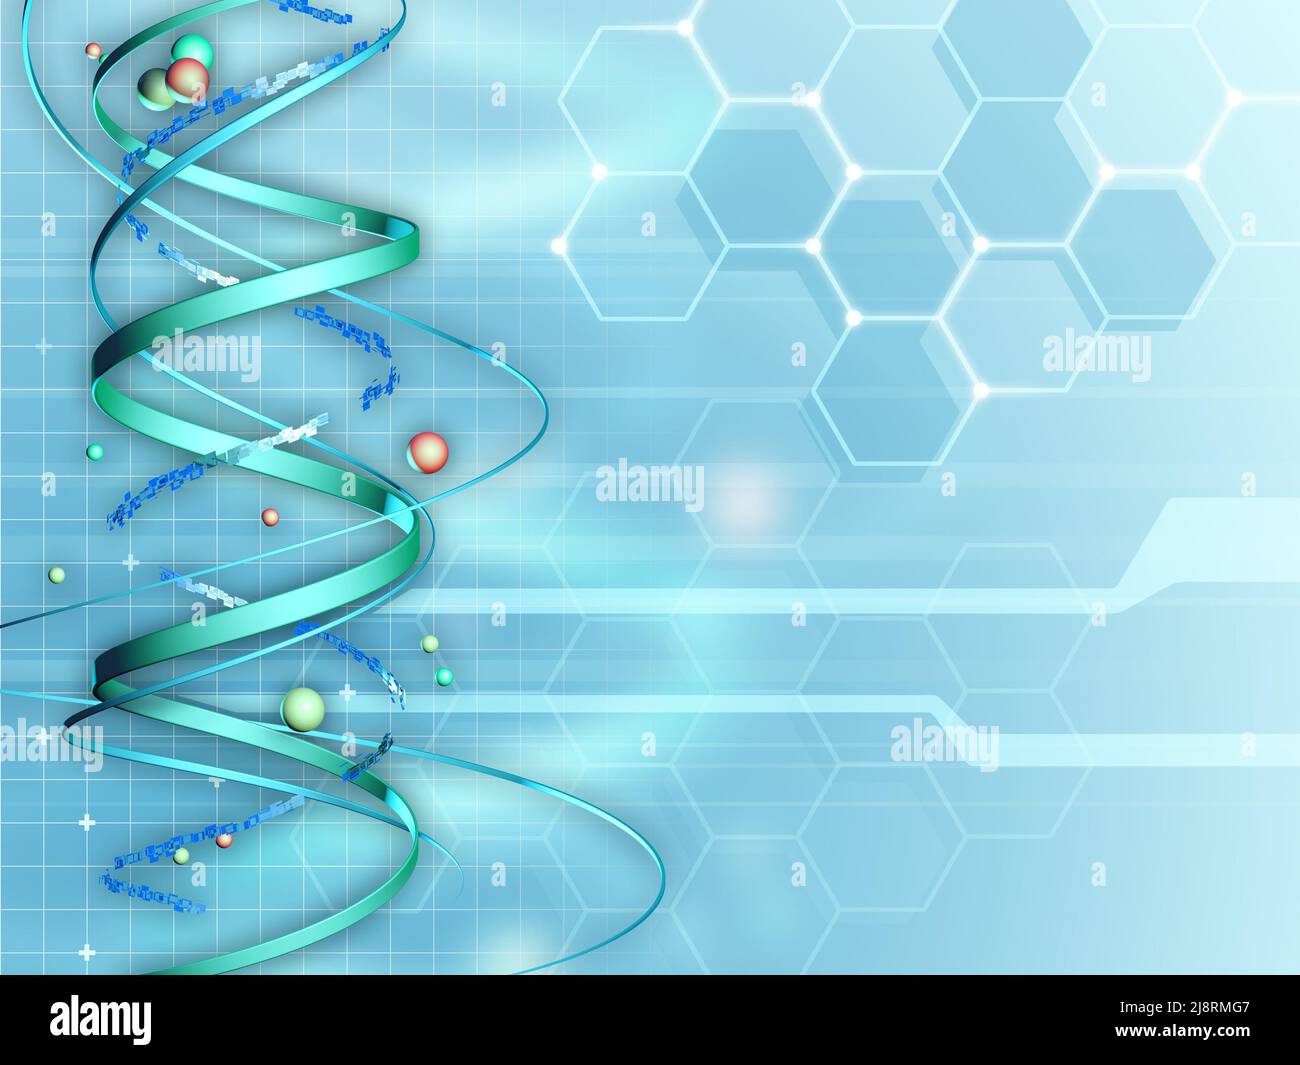 Background suitable for medical and research subjects. Digital illustration. Stock Photo